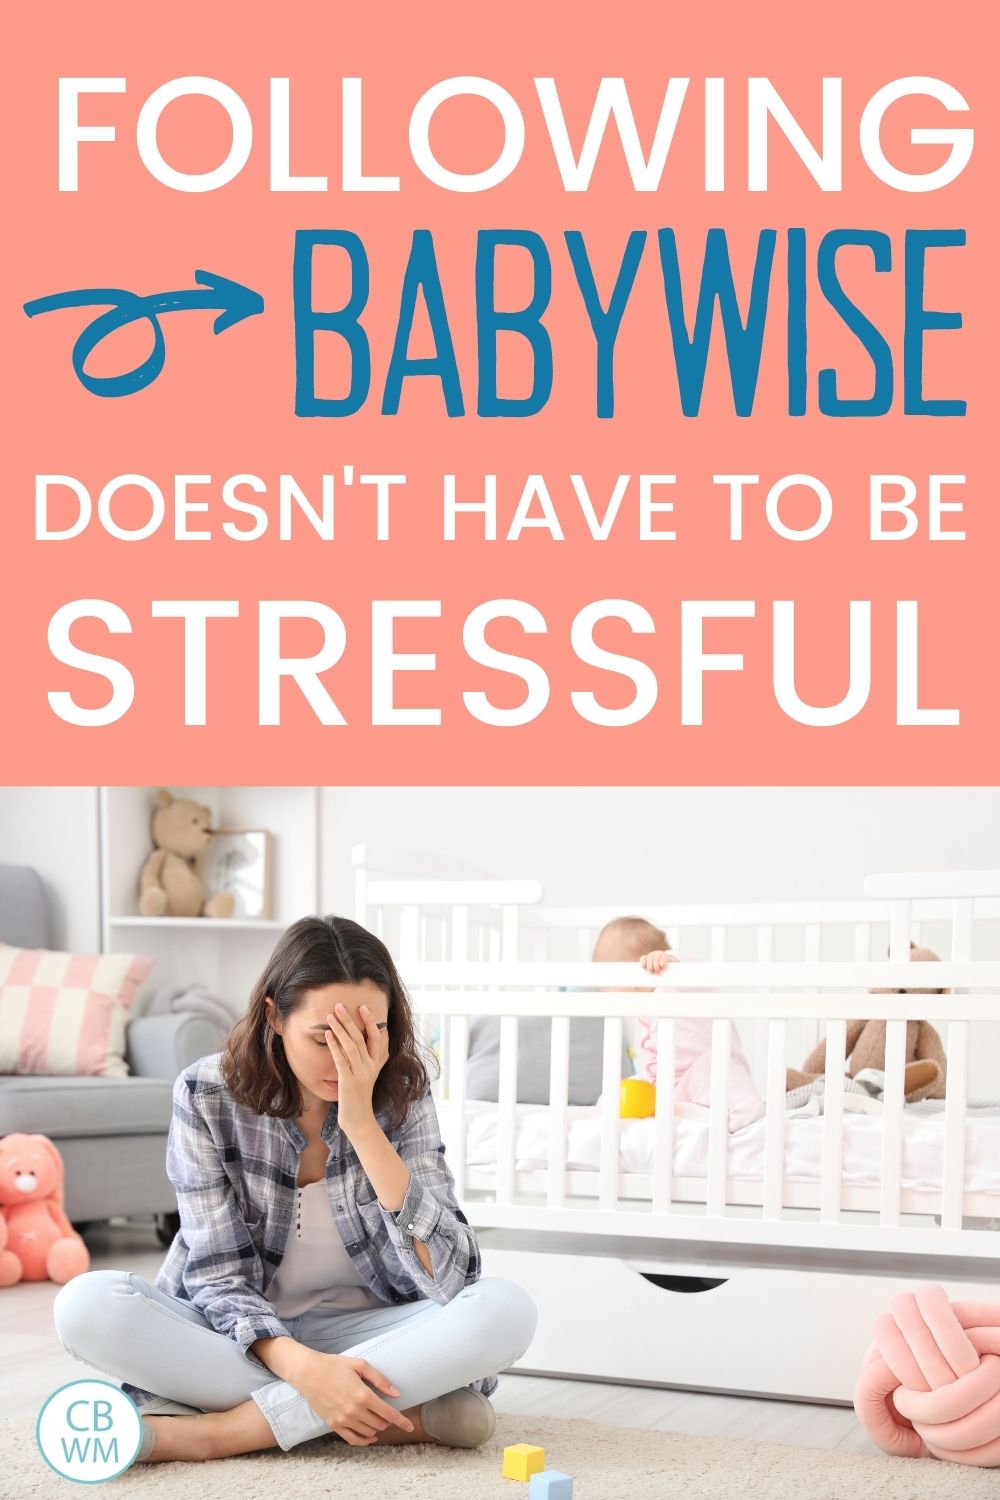 Following babywise not stressful